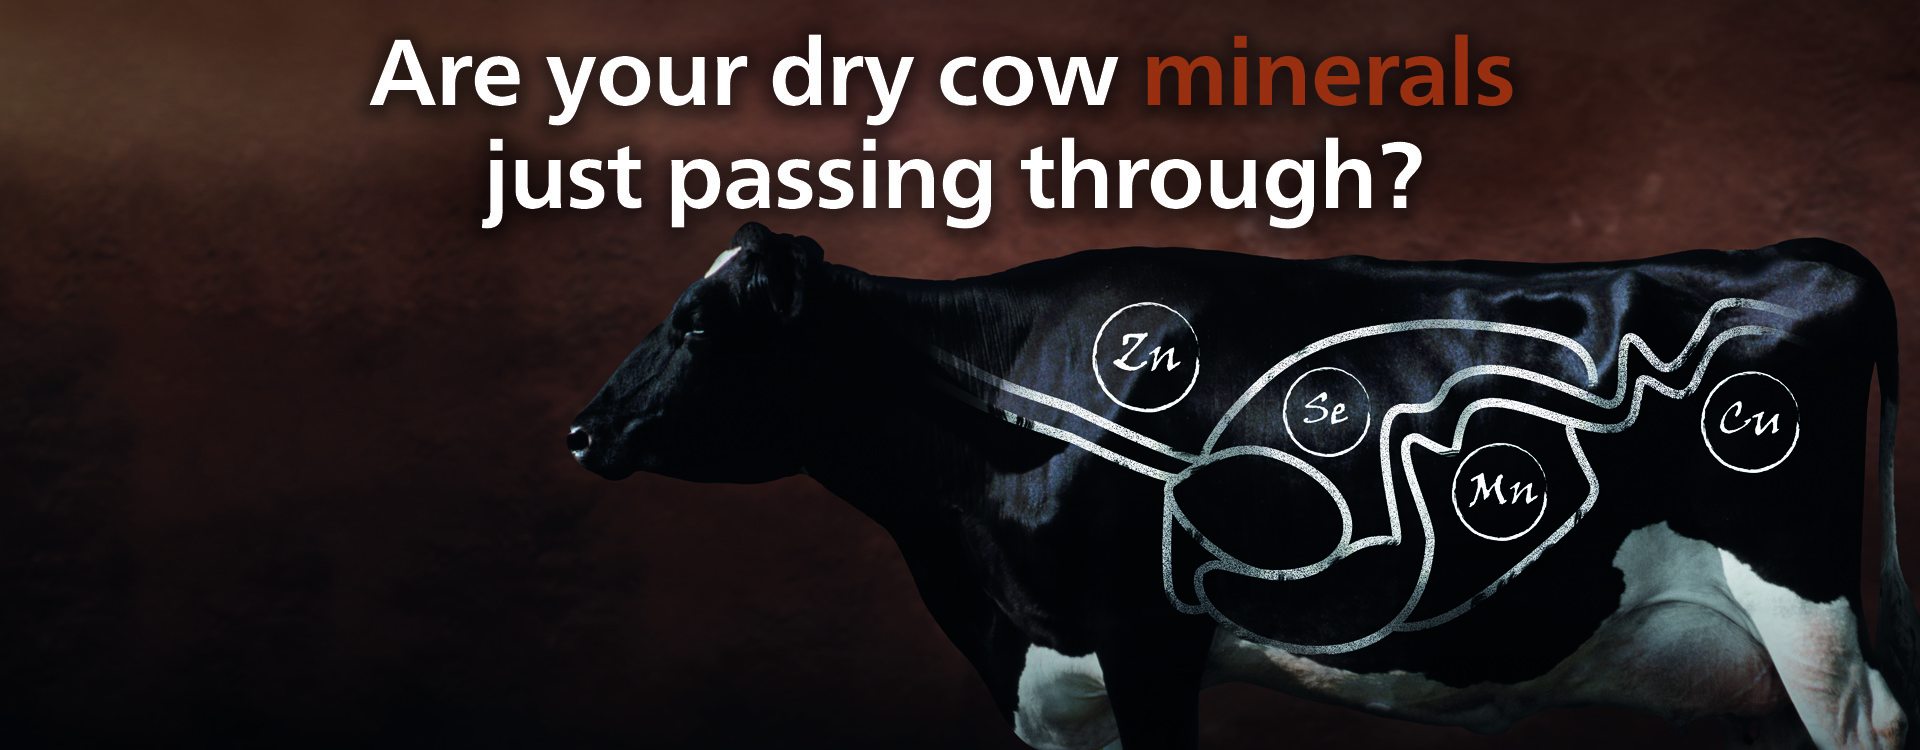 Are your dry cow minerals just passing through?